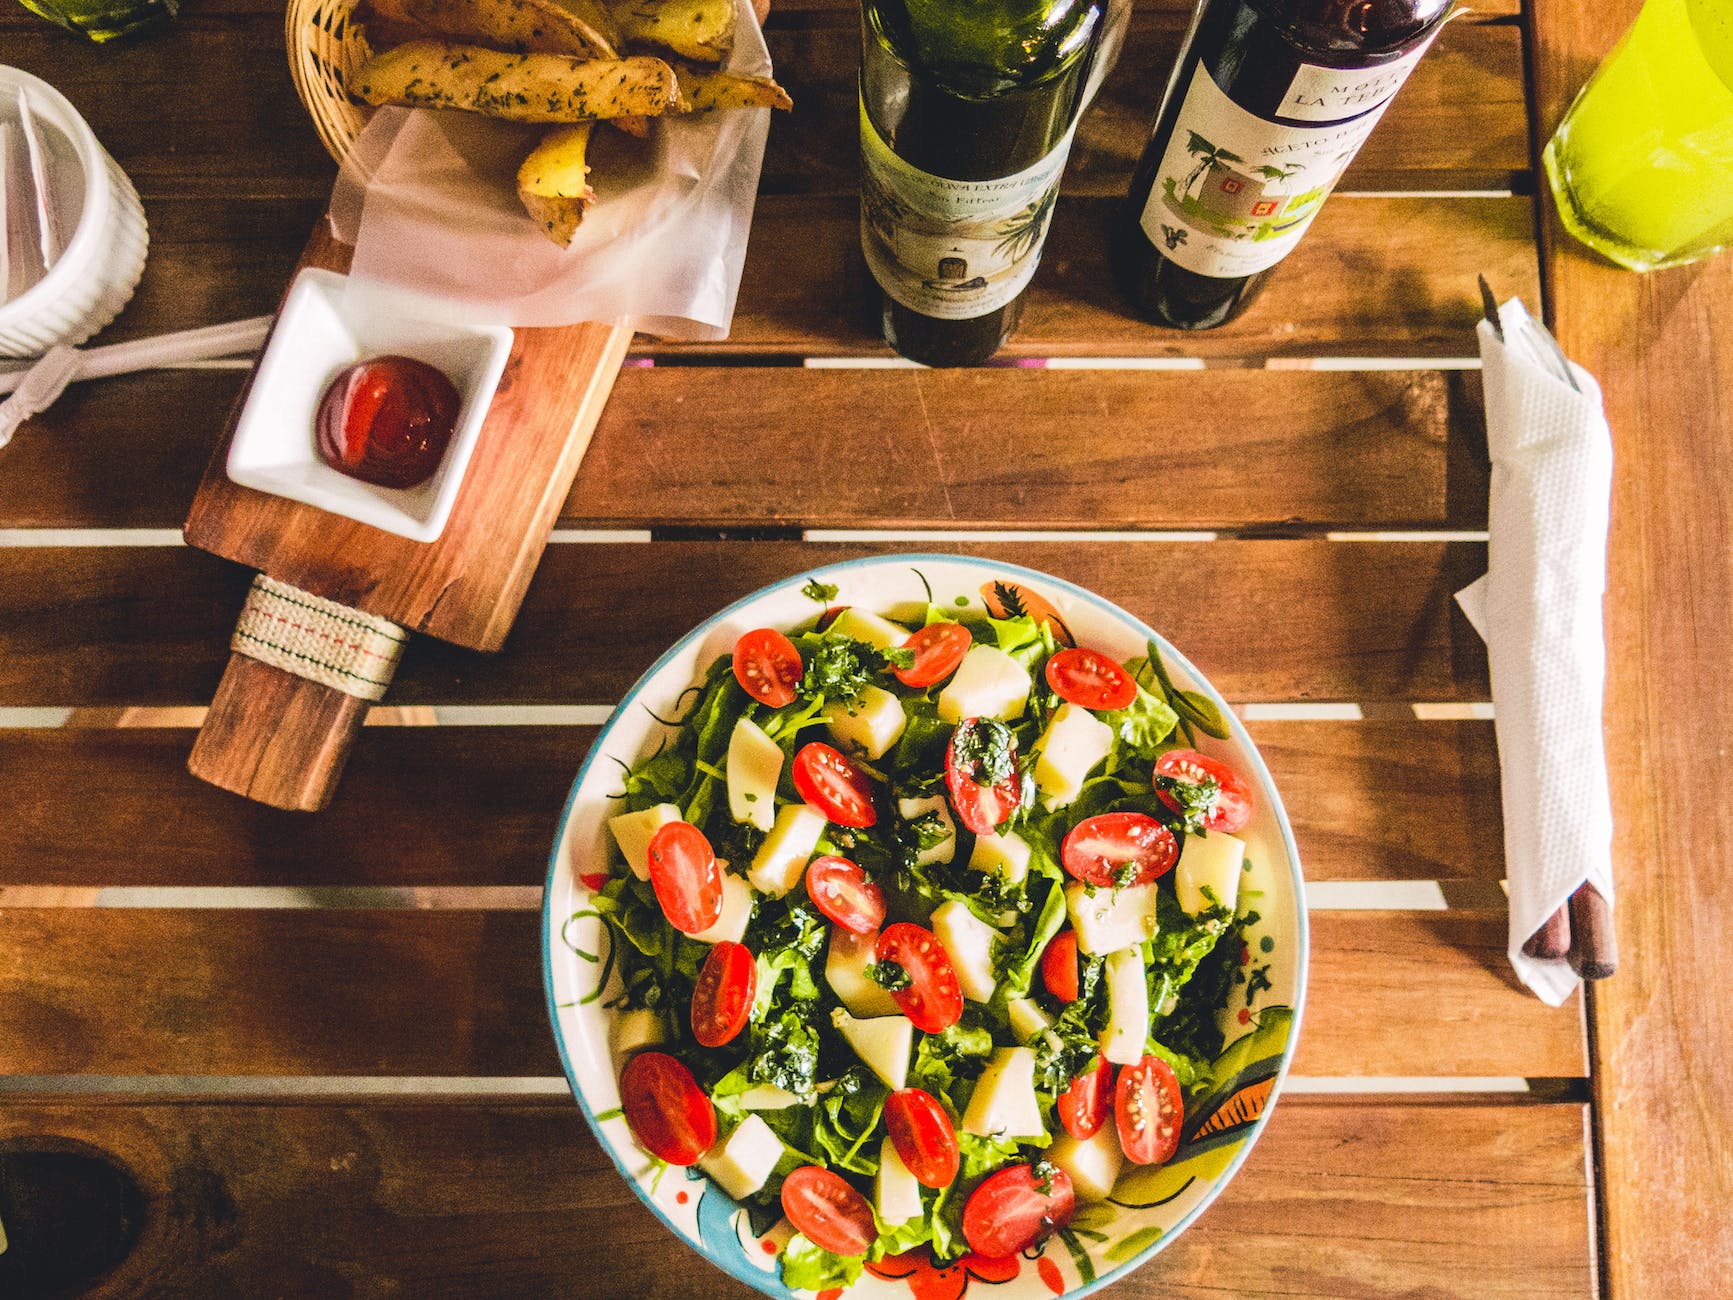 Healthy vegetable salad with cherry tomatoes and mix leaves what is the mediterranean diet?